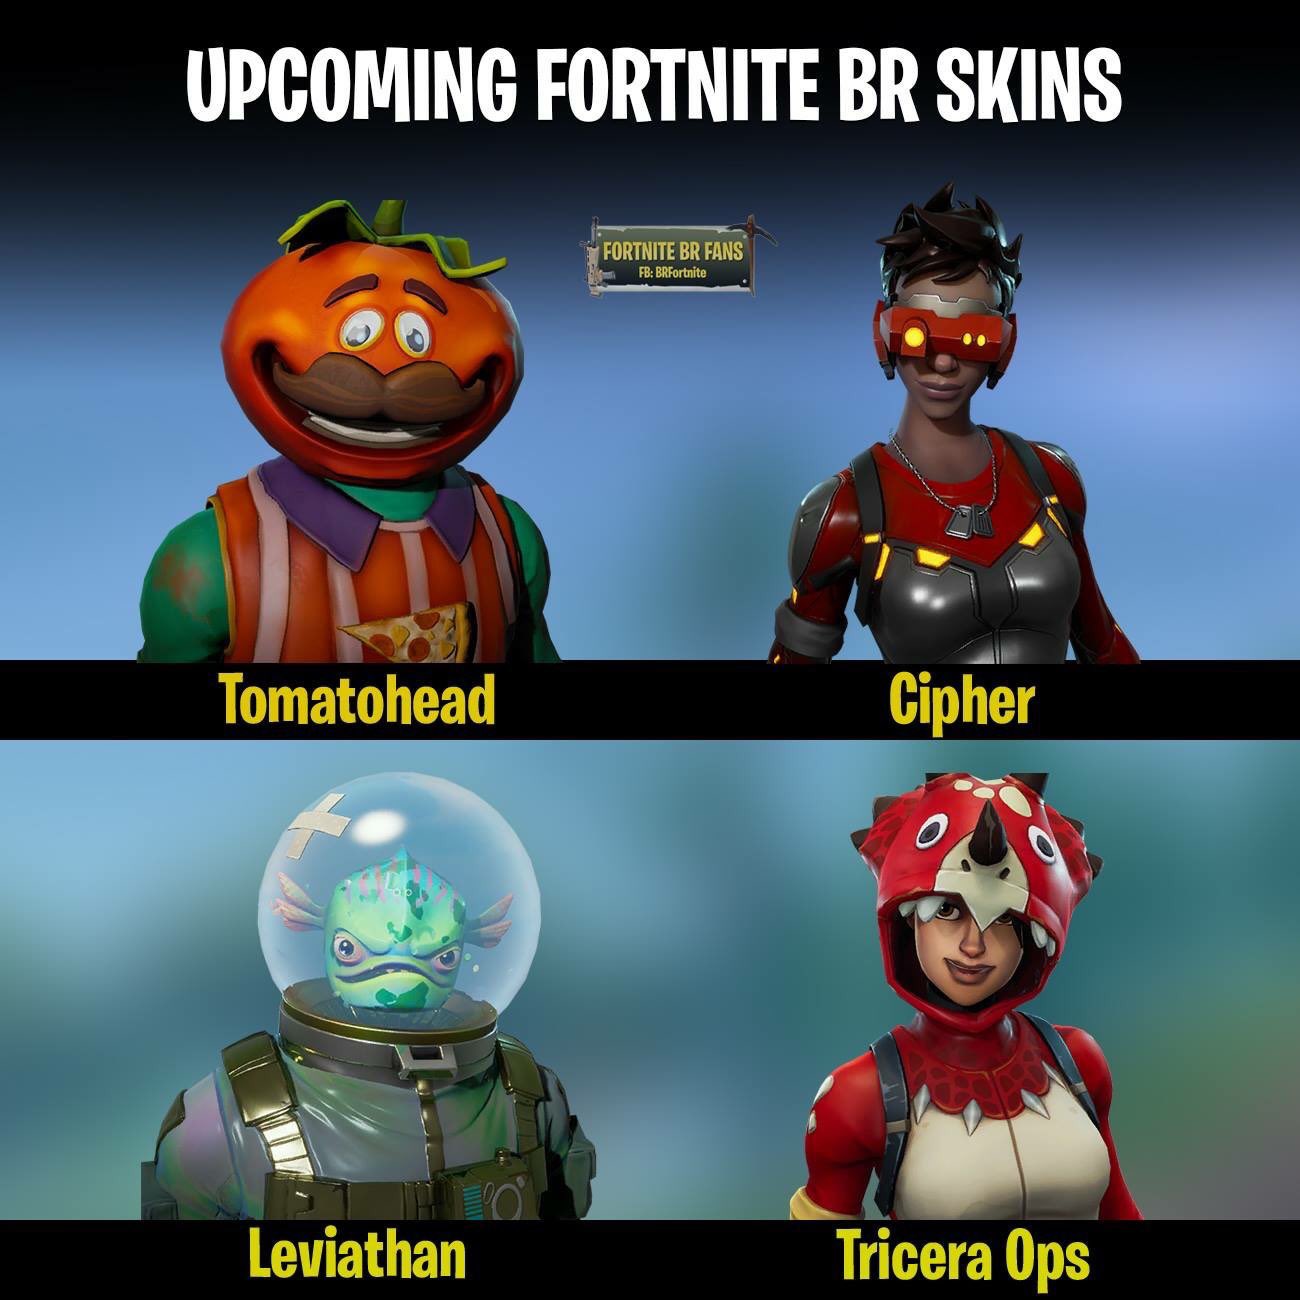 Fortnite Memes Daily on Twitter: "Which one of these new skins are you